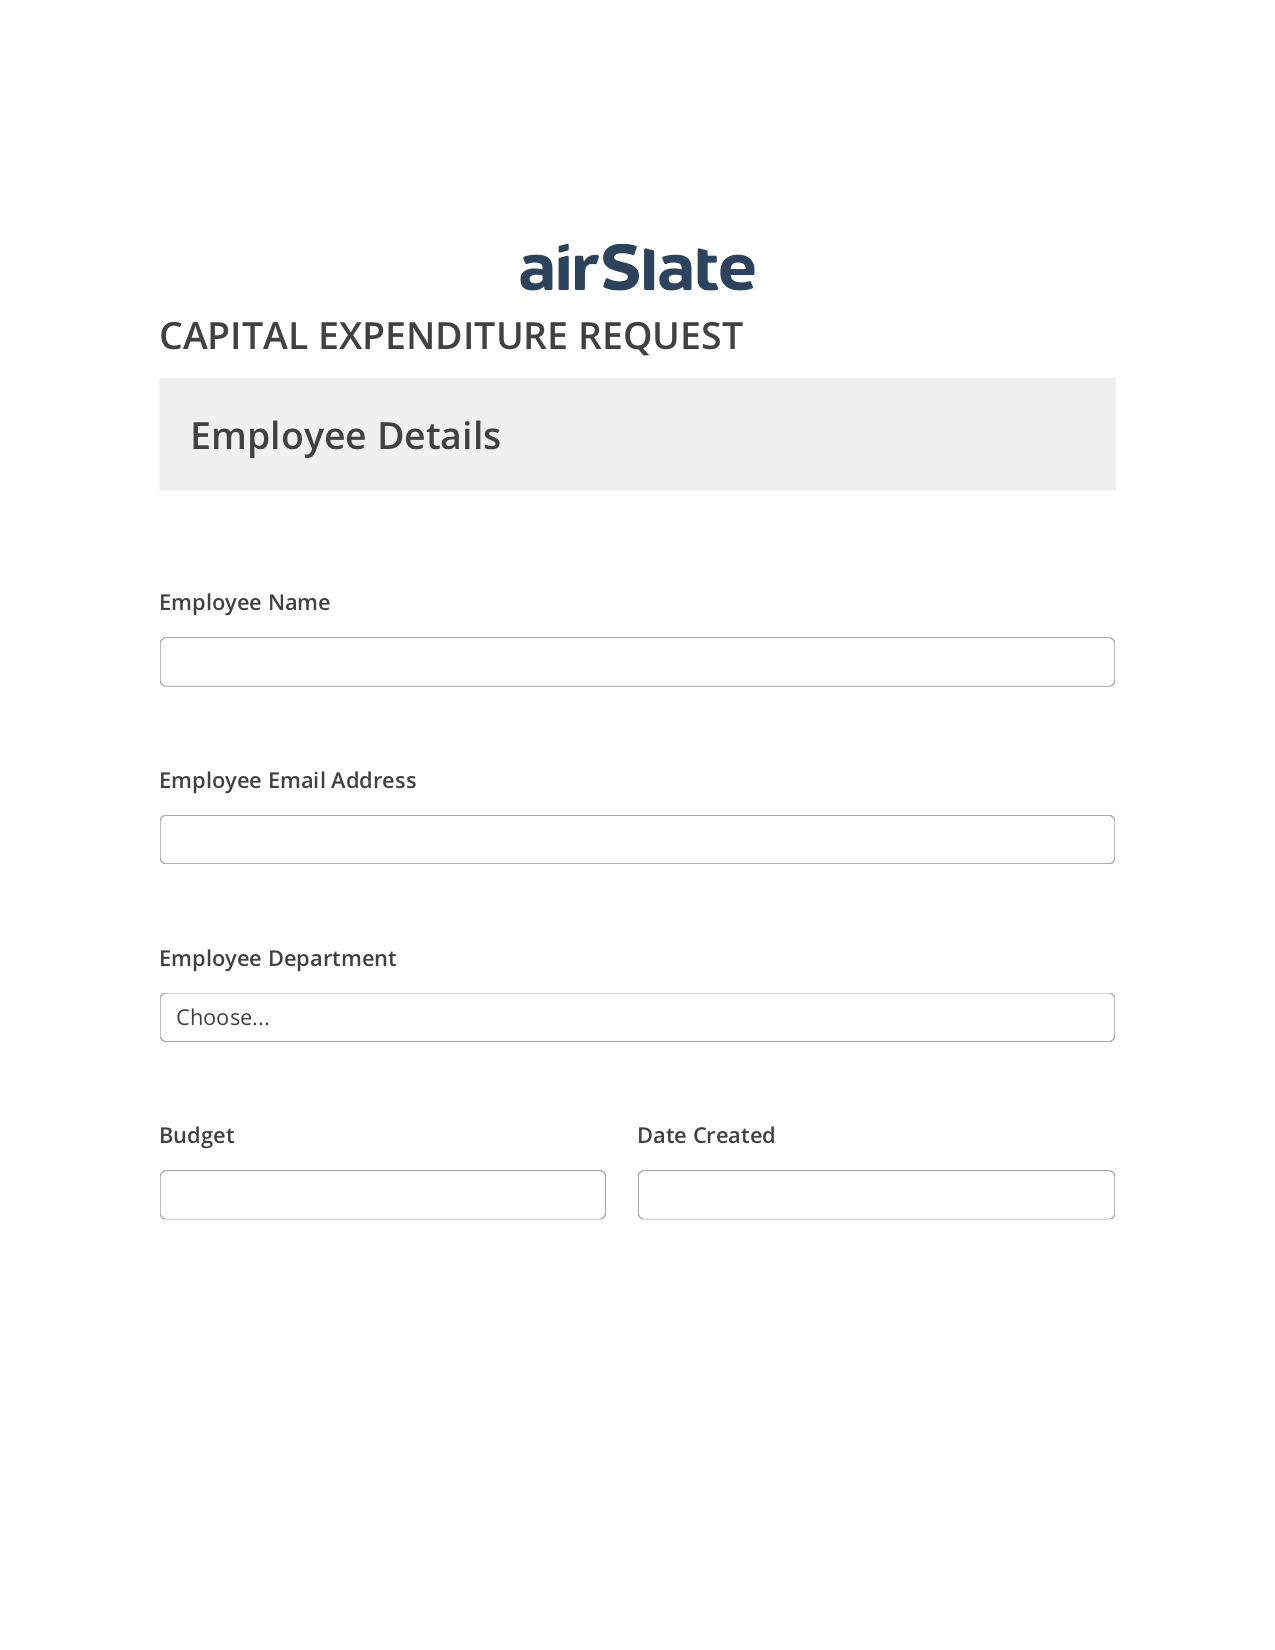 Capital Expenditure Request Approval Workflow Pre-fill Dropdowns from Smartsheet Bot, Remove Slate Bot, Export to Excel 365